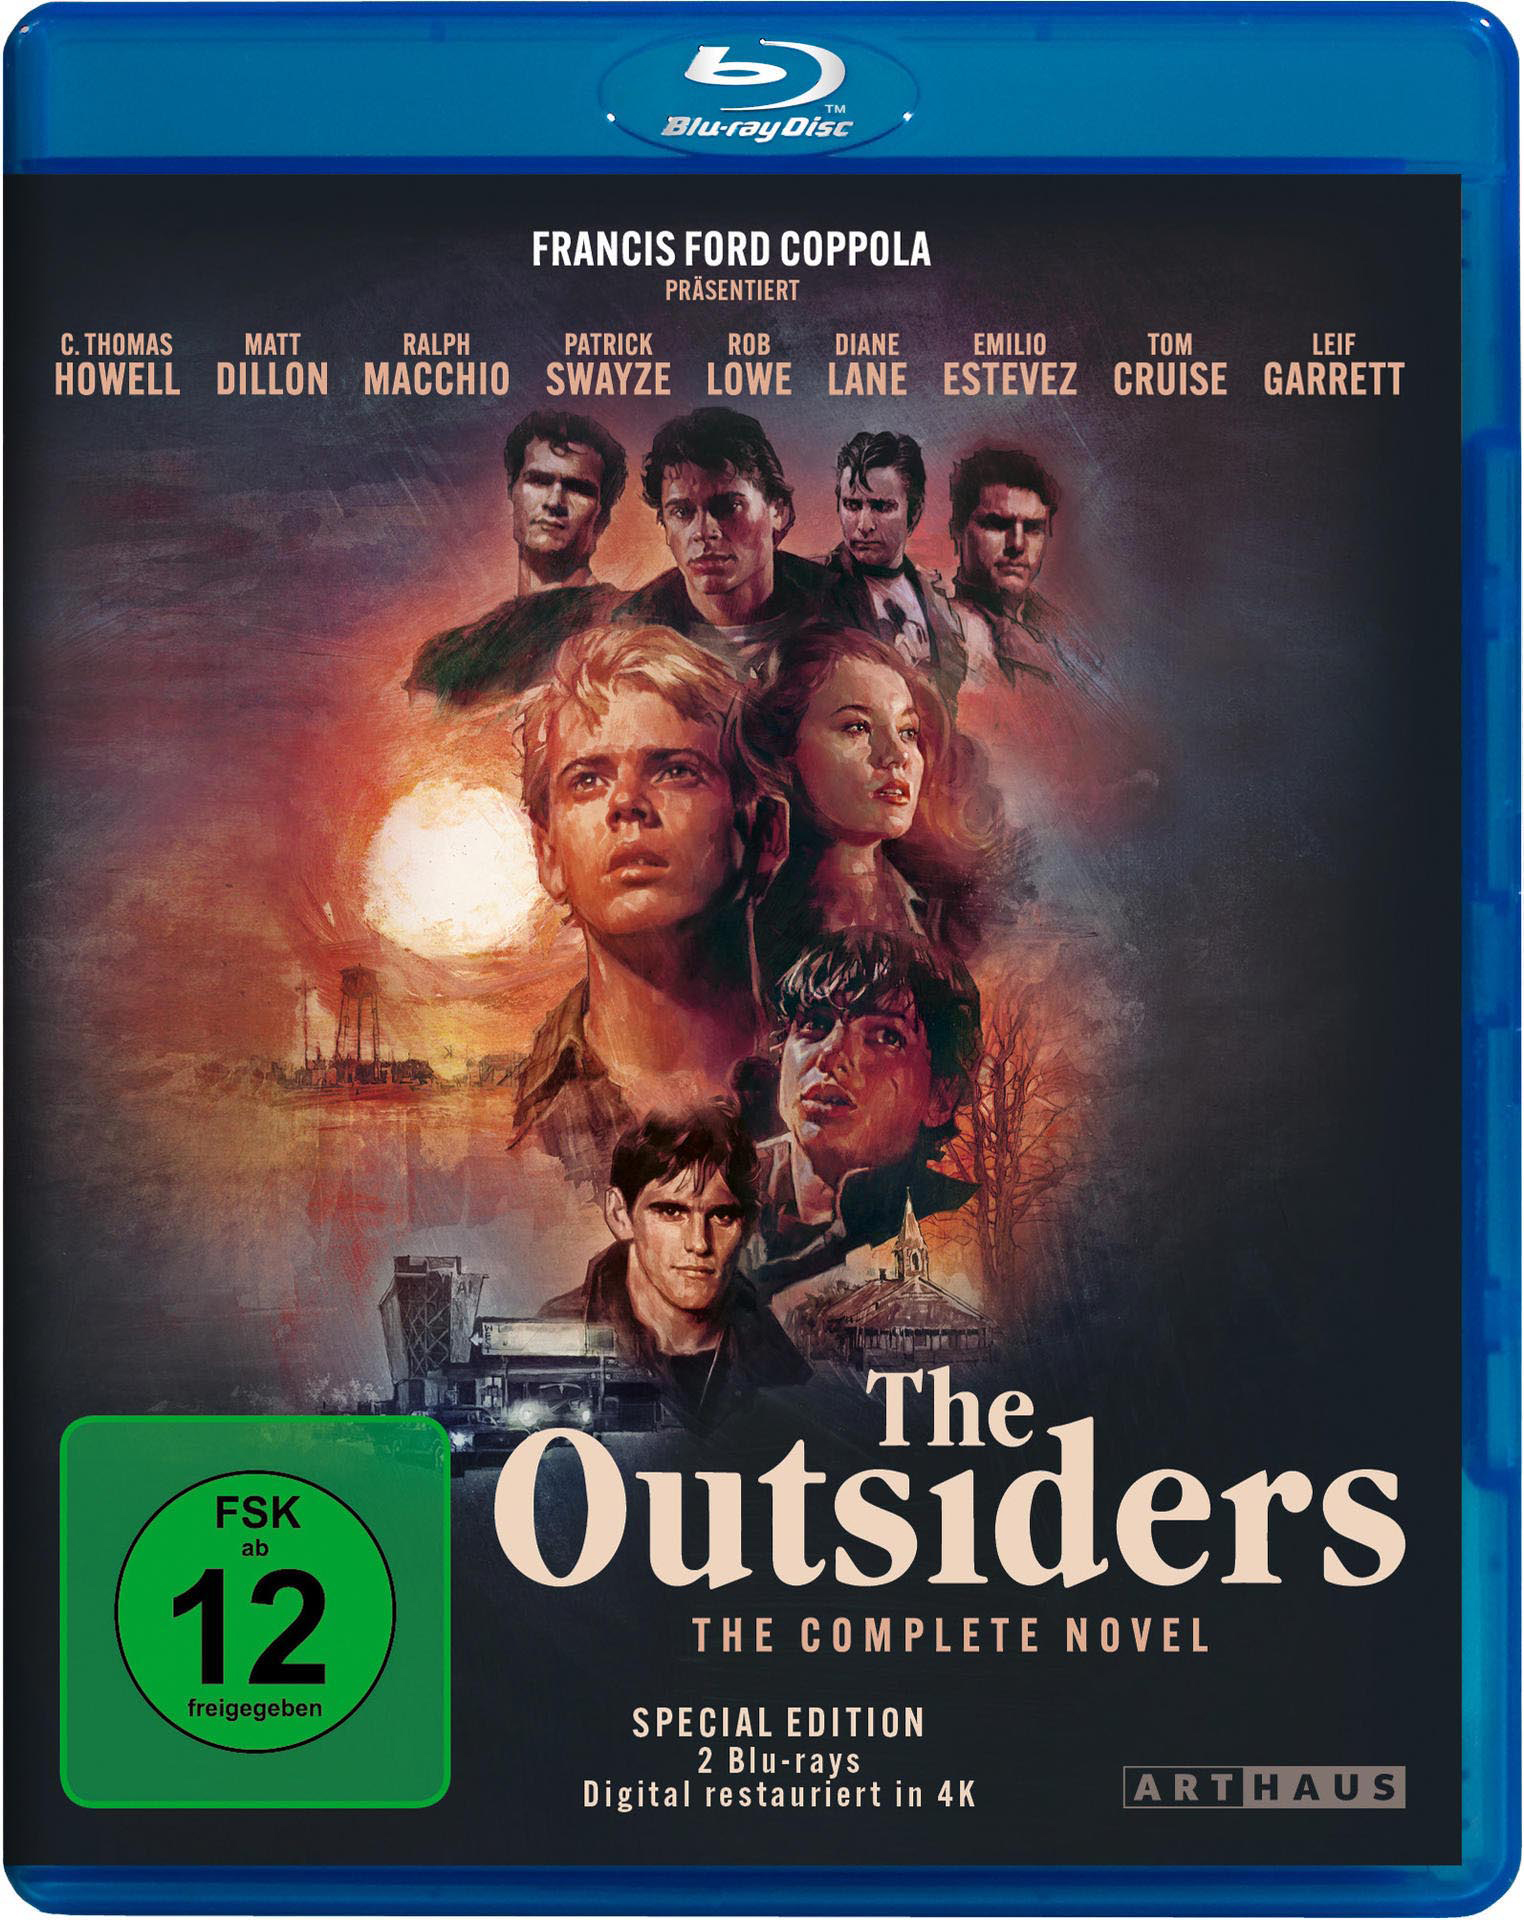 The Blu-ray Outsiders